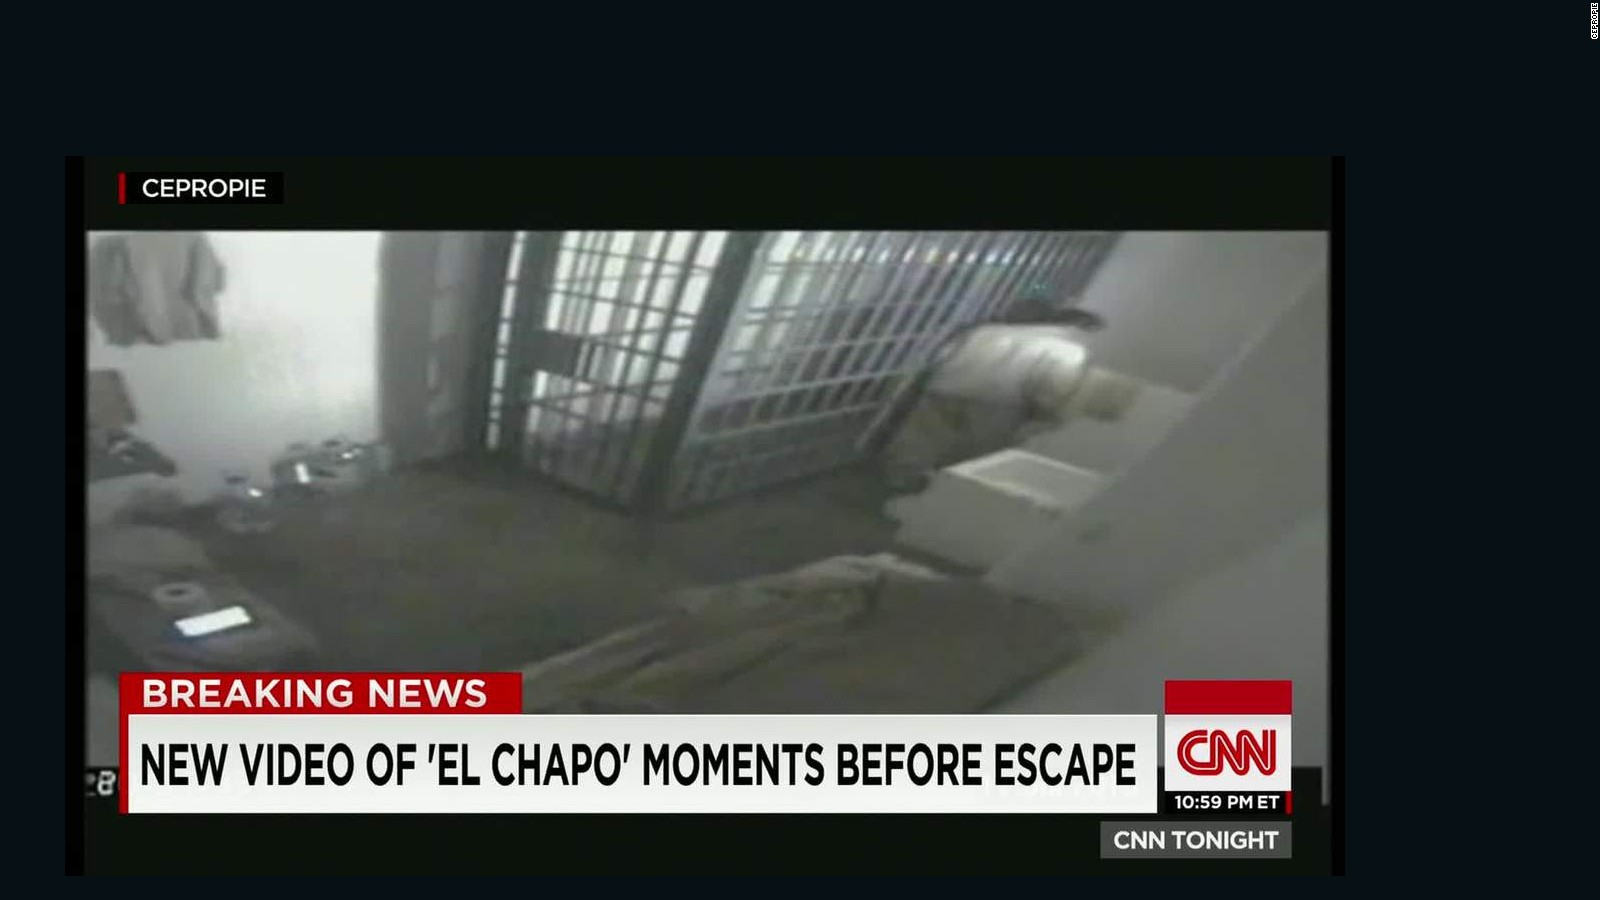 Video released of 'El Chapo' escaping CNN Video